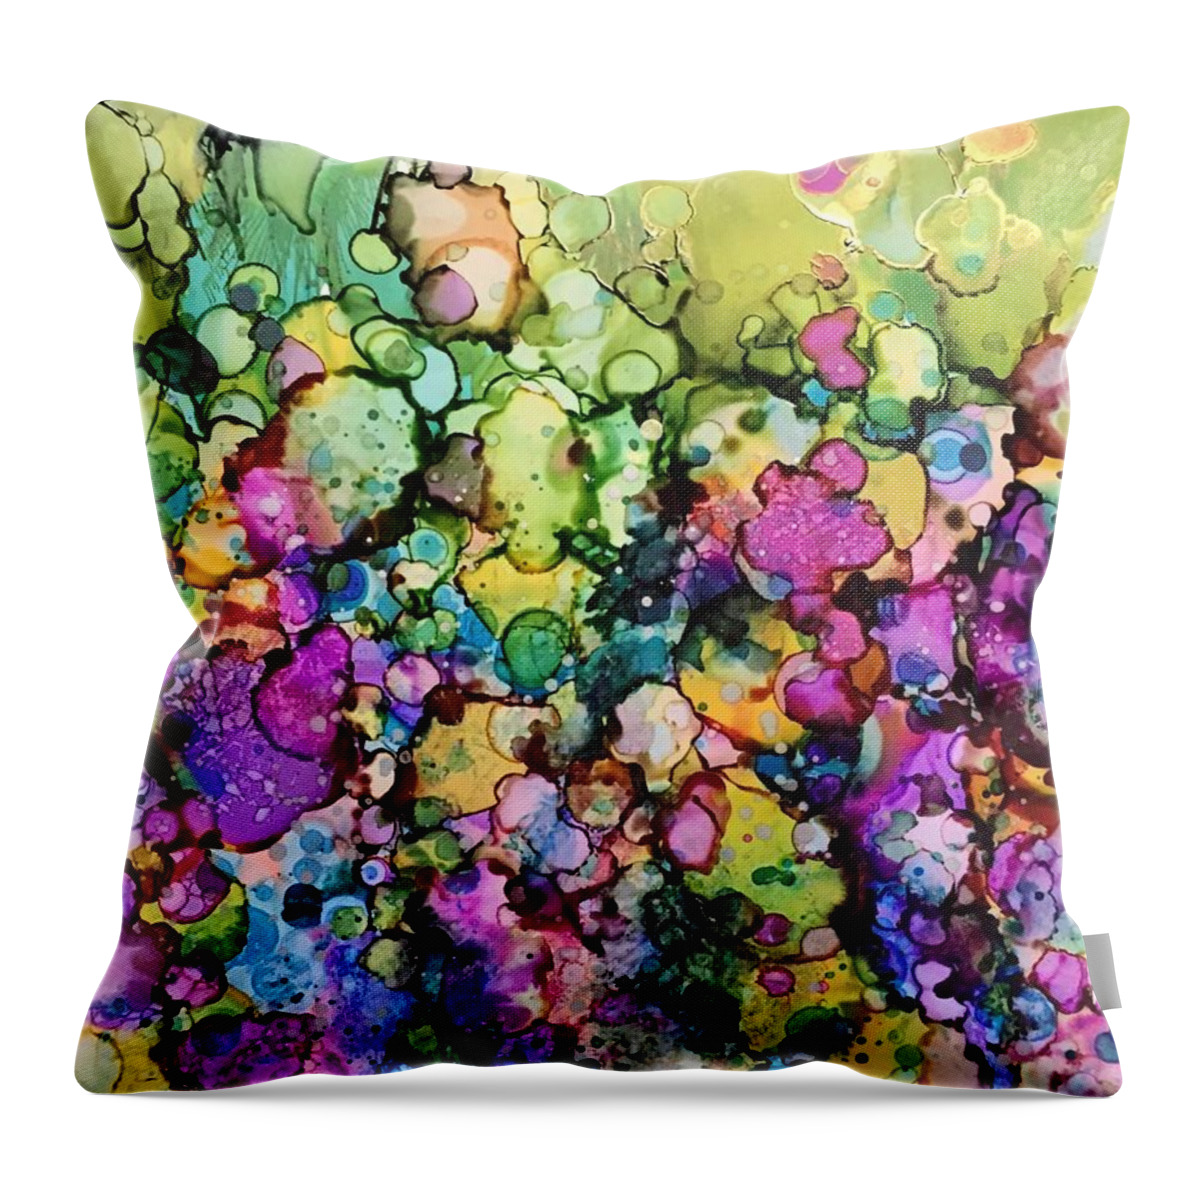 Abstract Painting. Throw Pillow featuring the painting Slippery Light by Nancy Koehler